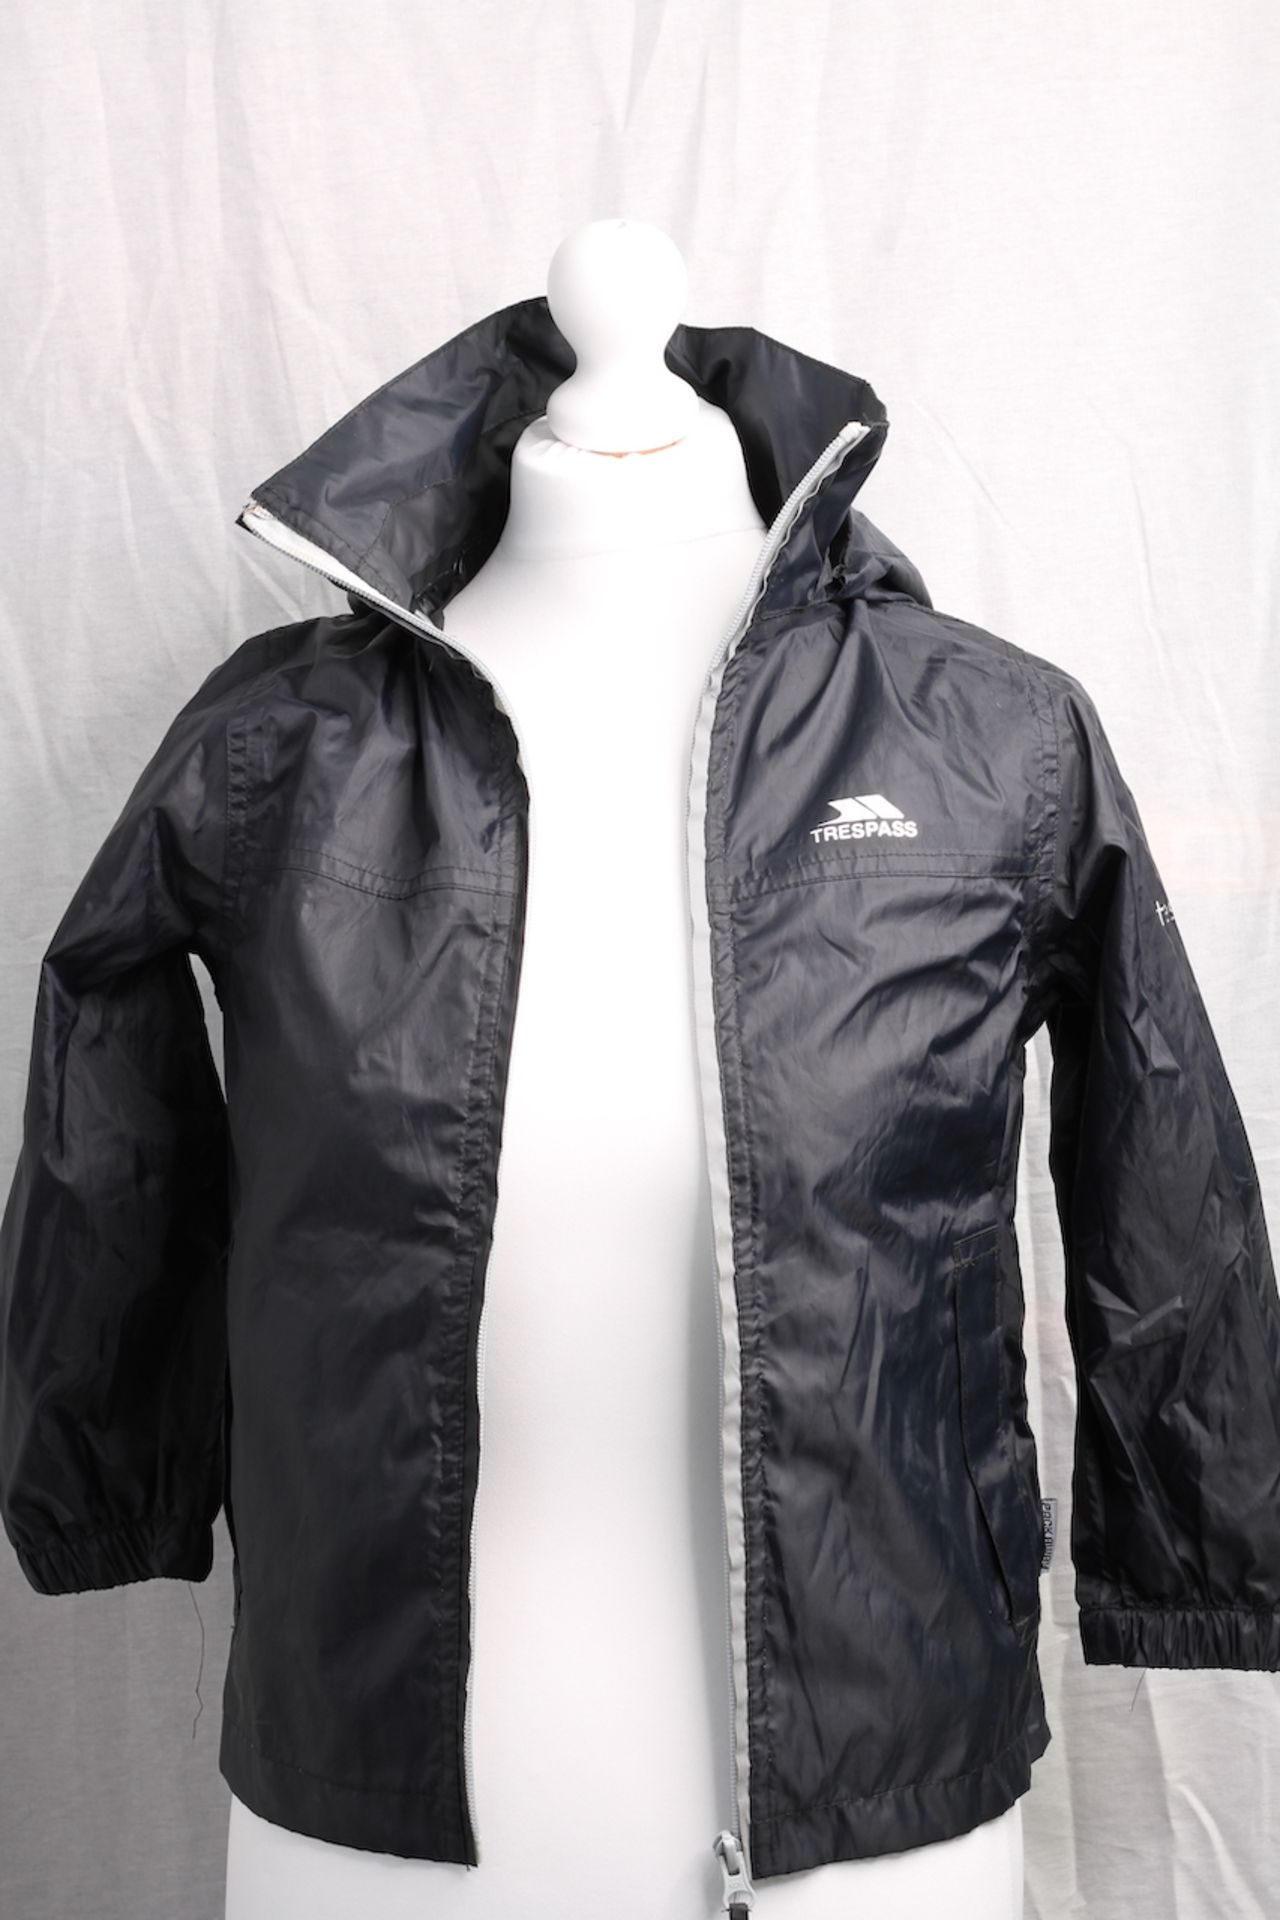 TRESSPASS CHILDS WATERPROOF JACKET, Colour : BLACK, AGE: 5YRS, SIZE: UNKNOWN, CONDITION GRADE: